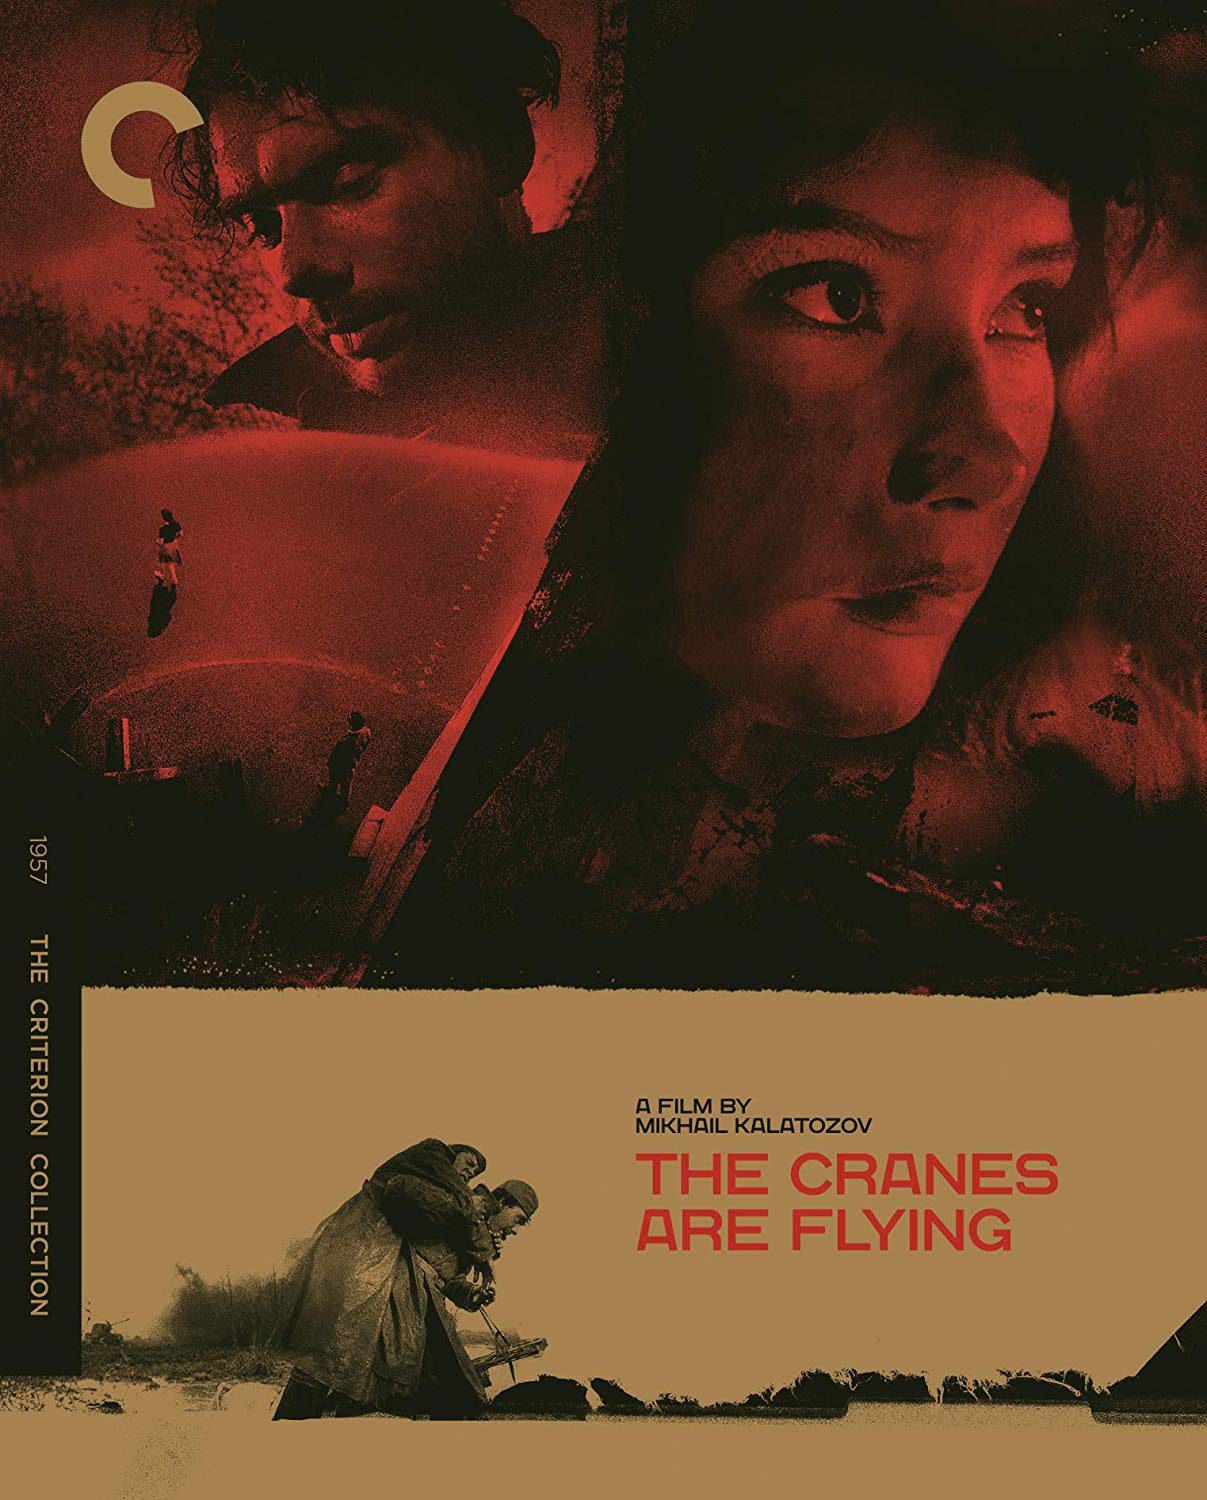 Cranes Are Flying [Criterion Collection] [Blu-ray] cover art